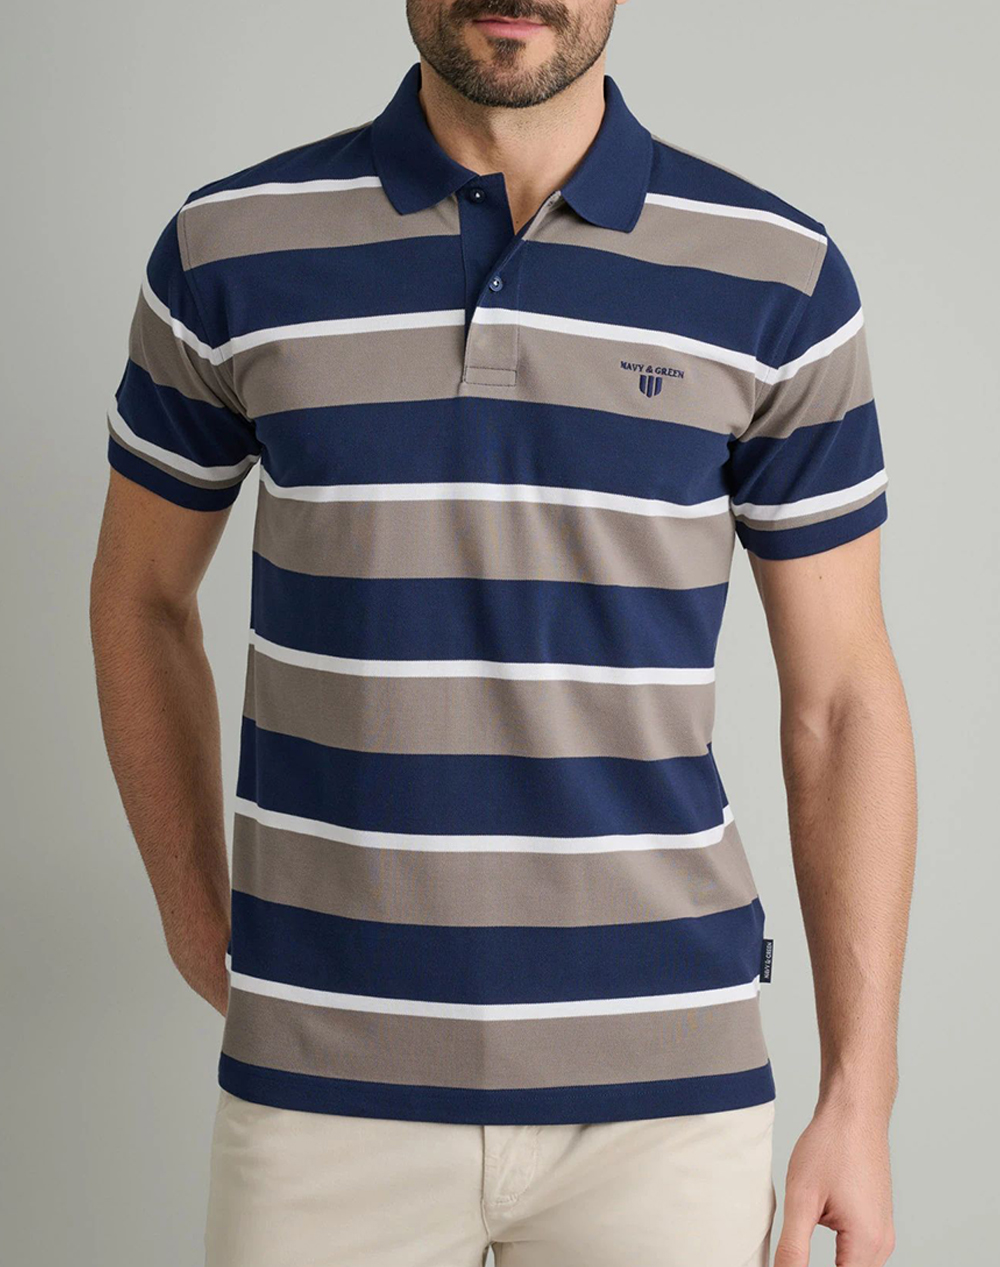 NAVY&GREEN POLO ΜΠΛΟΥΖΑΚΙ-CUSTOM FIT 24GE.1026-MD BLUE/METALLO Mixed